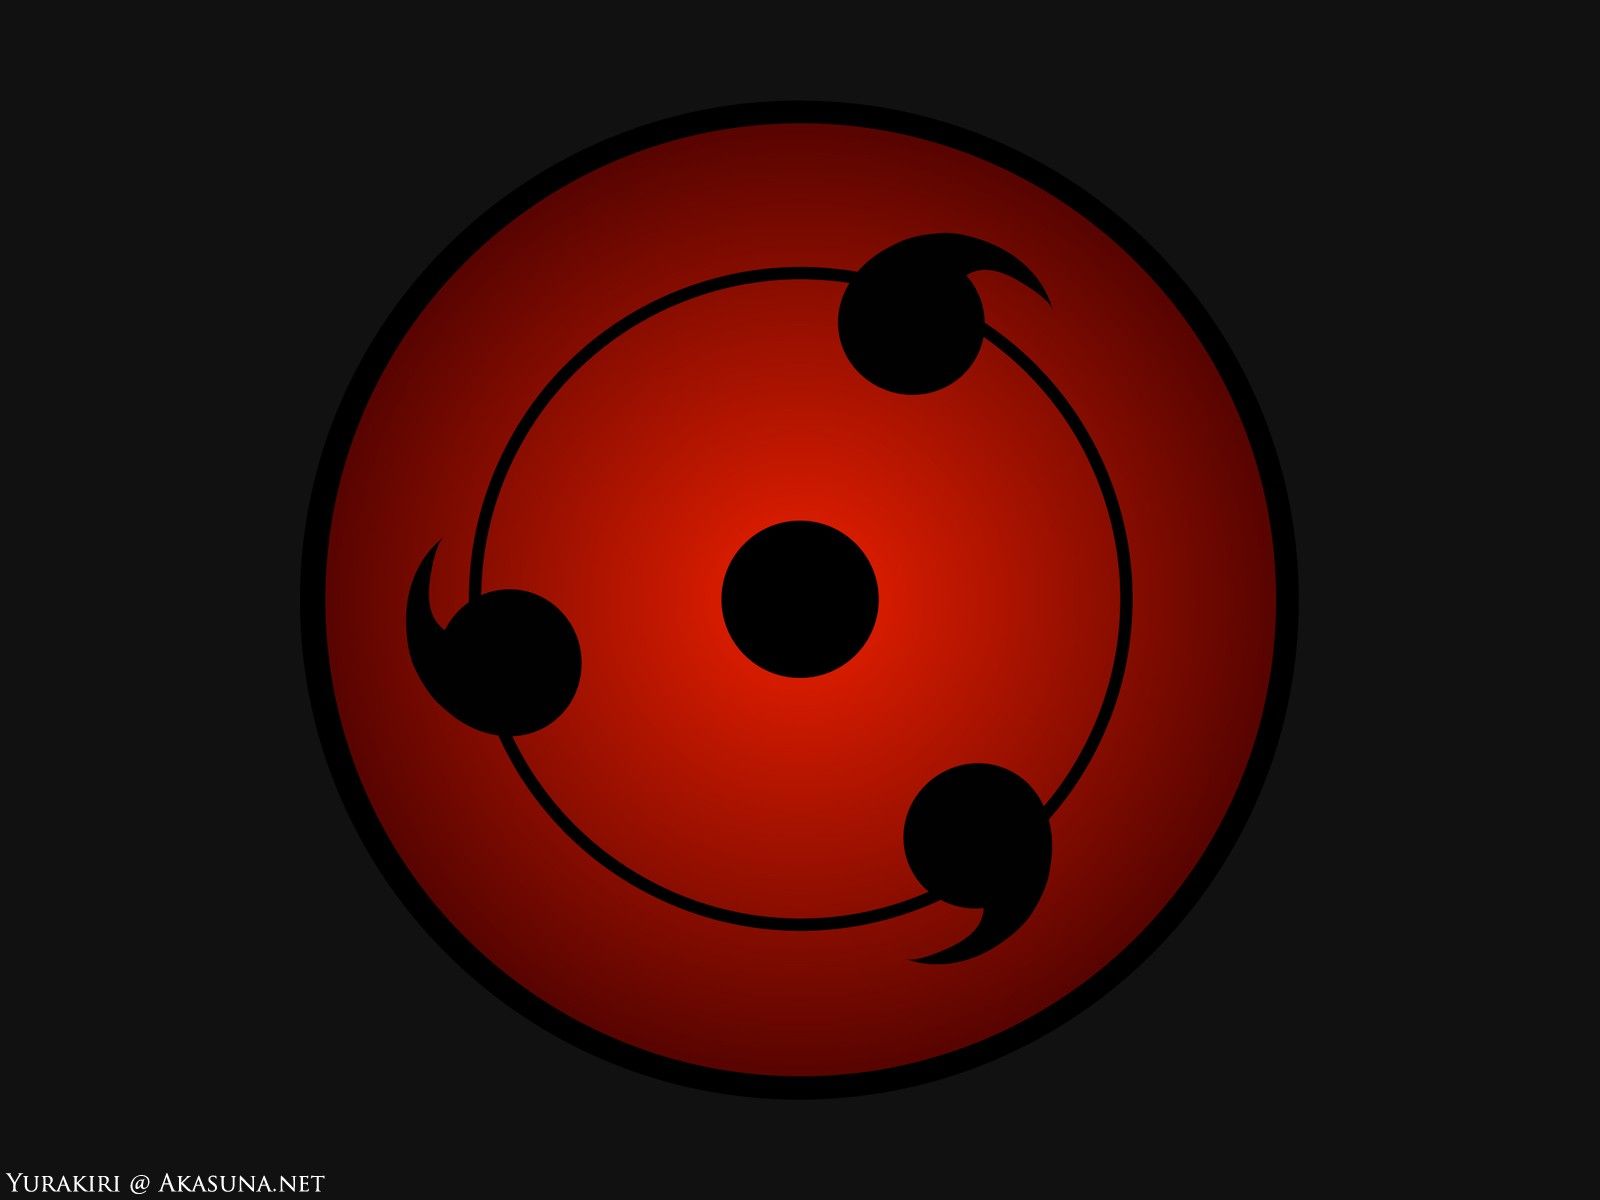 Sharingan Iphone 6 Wallpapers posted by Ethan Walker.